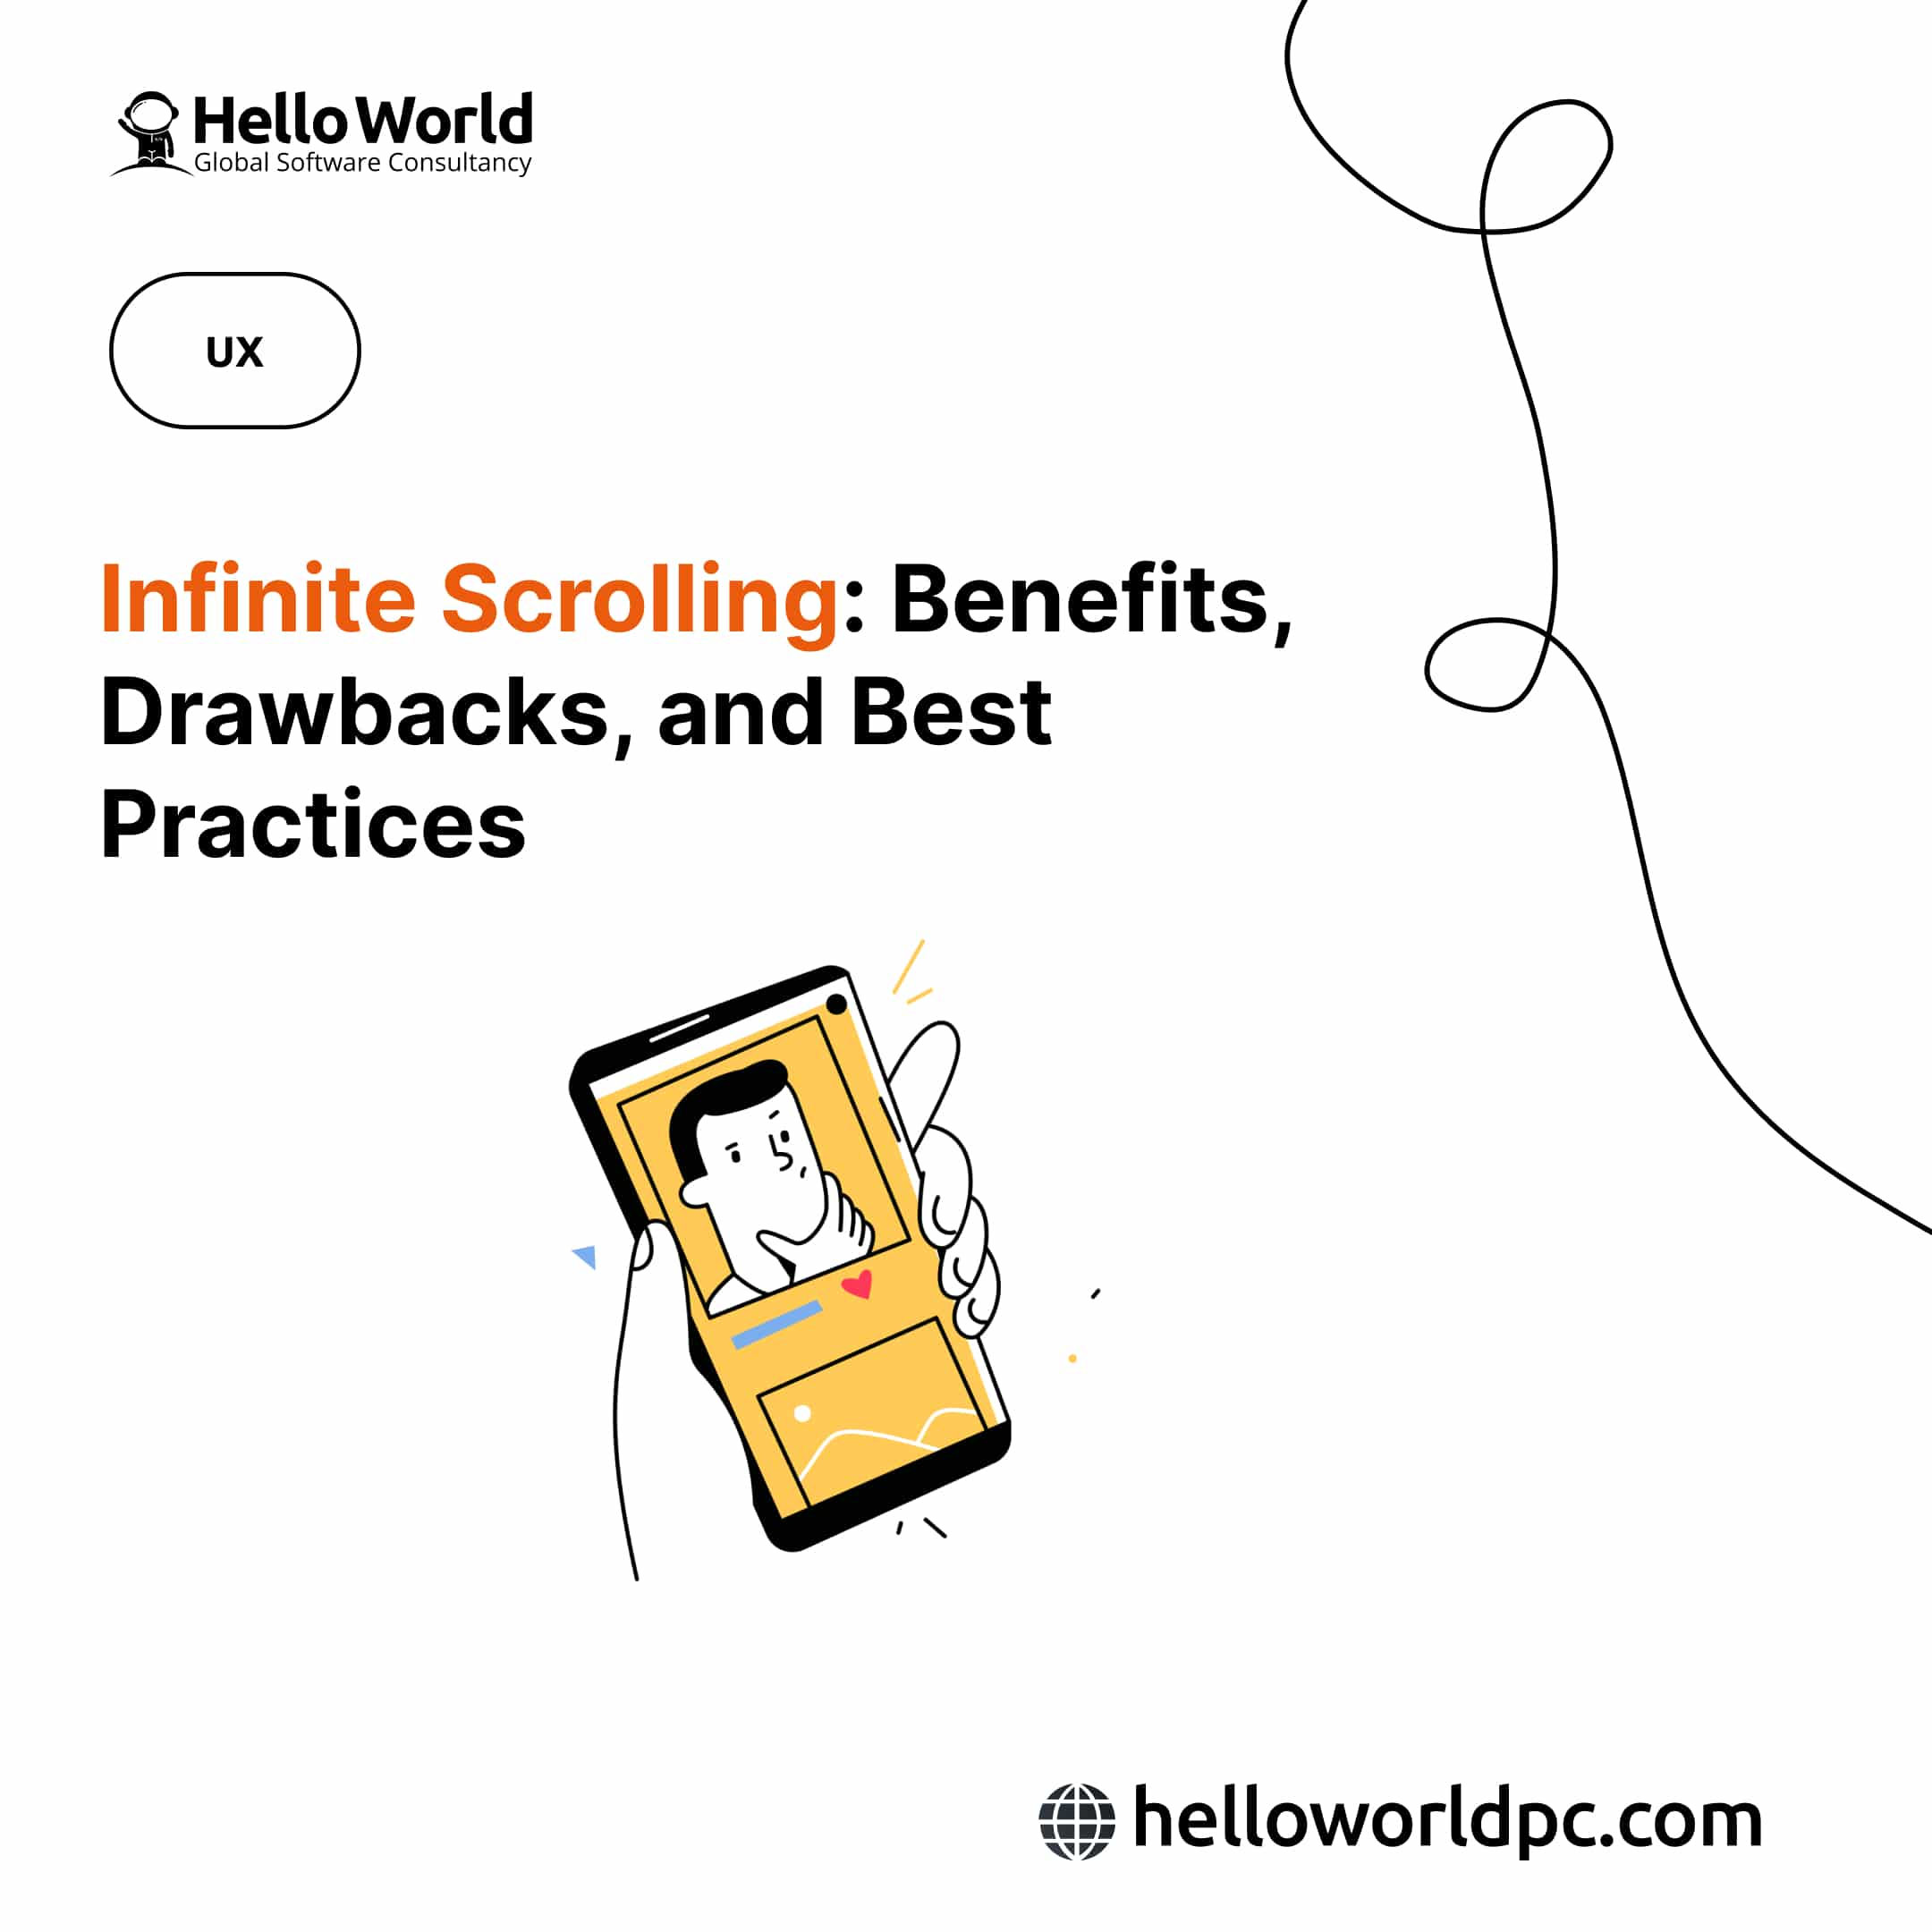 Infinite Scrolling: Benefits, Drawbacks, and Best Practices